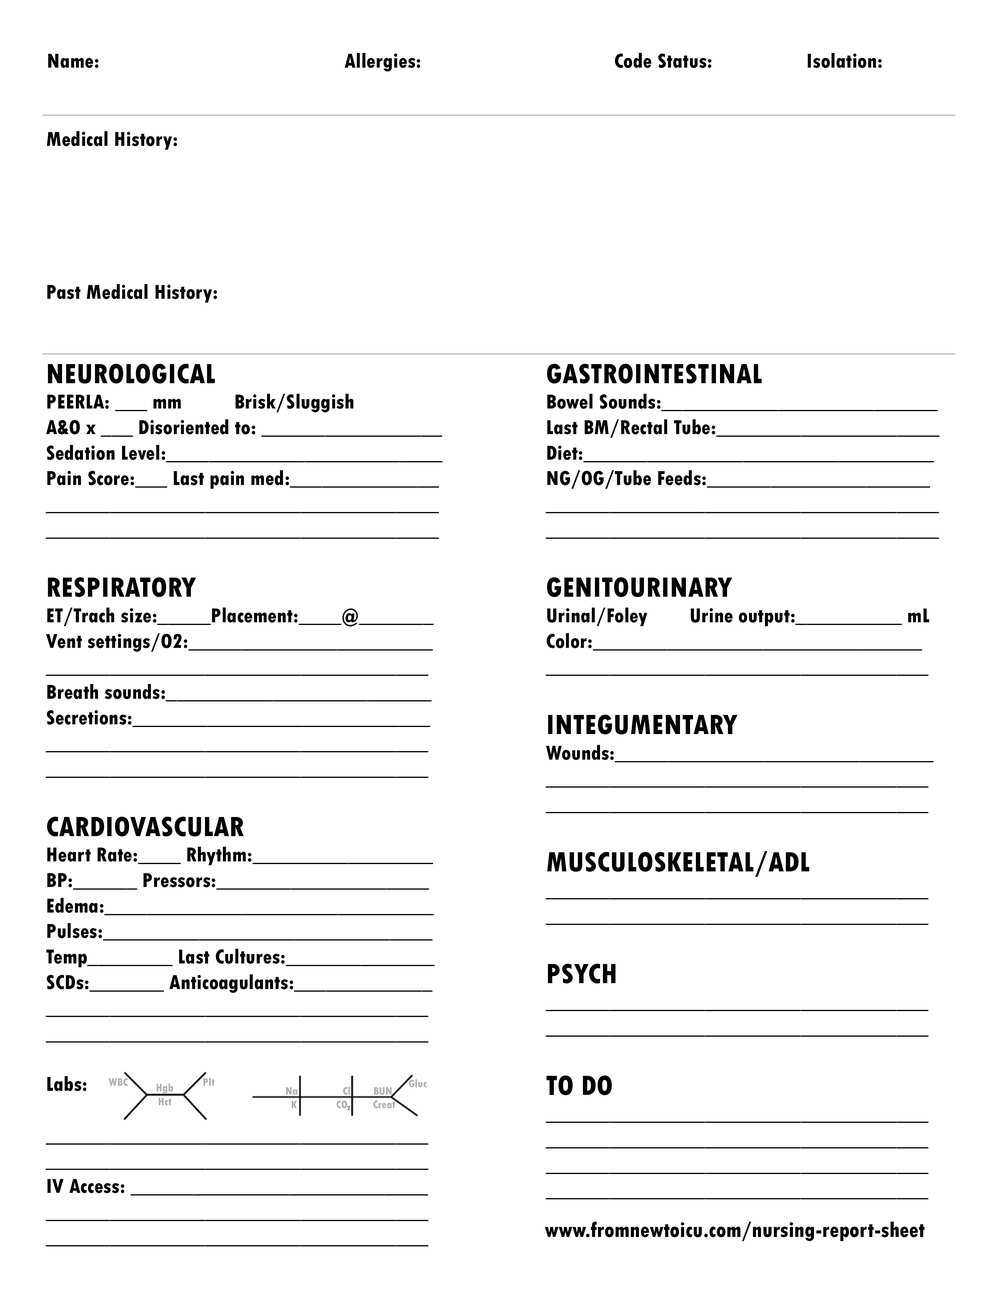 Nursing Report Sheet — From New To Icu Throughout Nursing Report Sheet Template